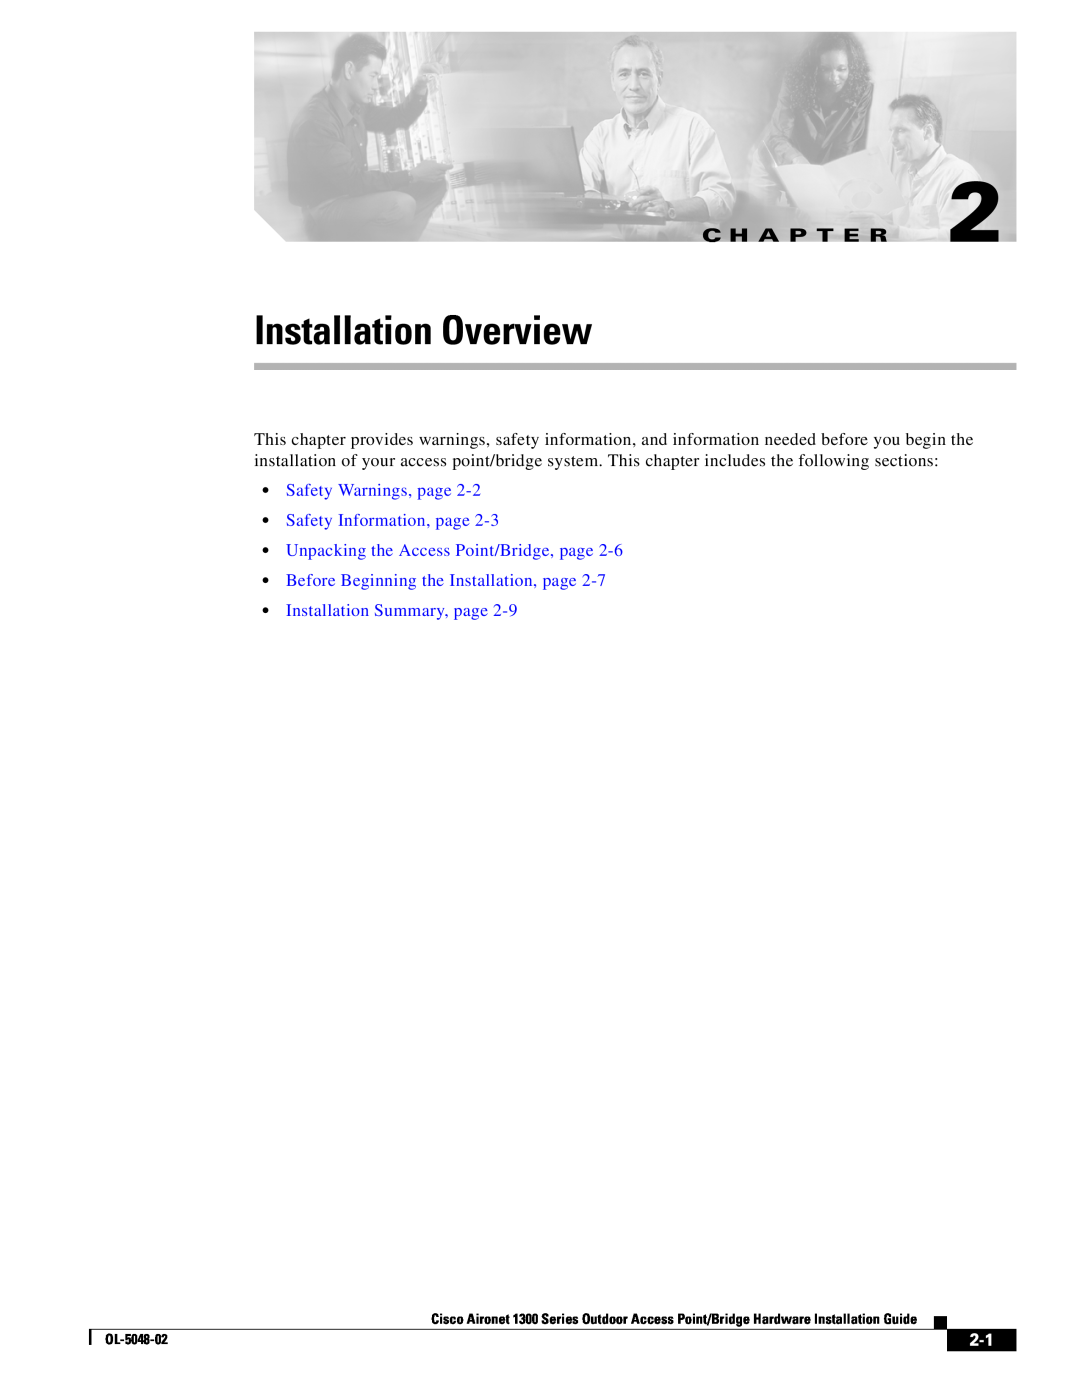 Cisco Systems 1300 Series Installation Overview, Safety Warnings, page Safety Information, page, C H A P T E R, OL-5048-02 